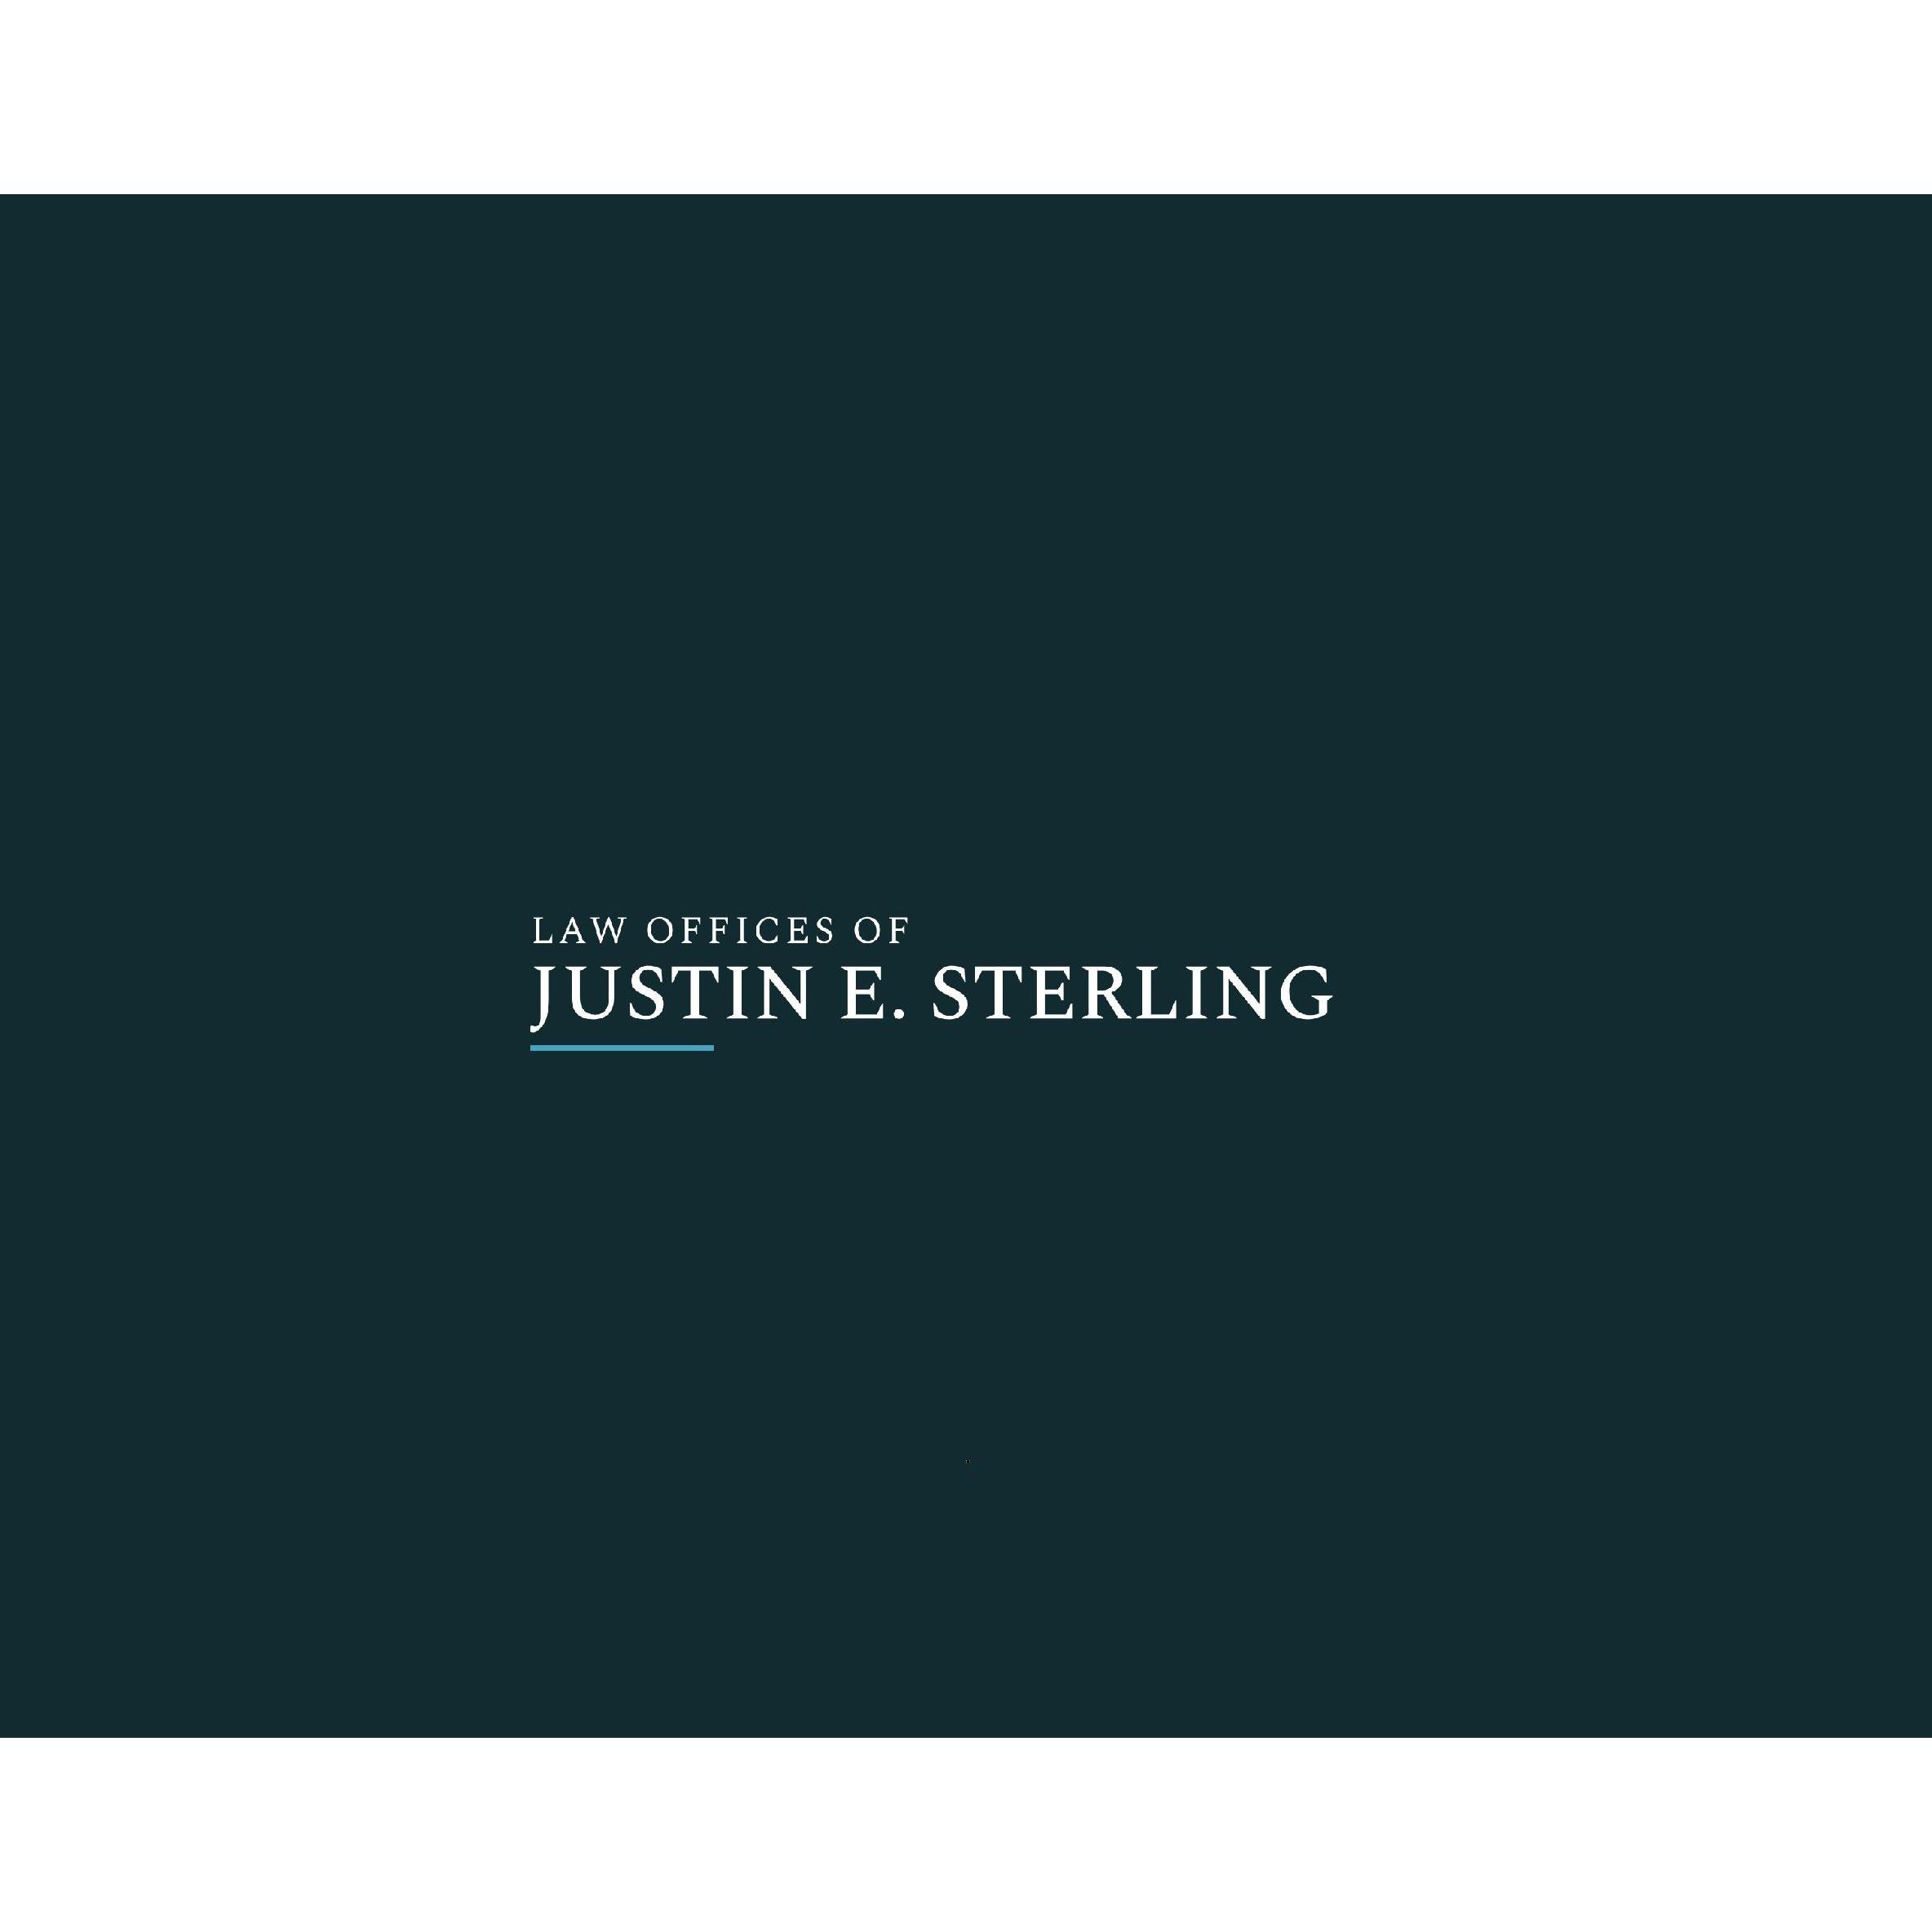 Law Offices Of Justin E. Sterling - Burbank, CA 91505 - (818)995-9452 | ShowMeLocal.com